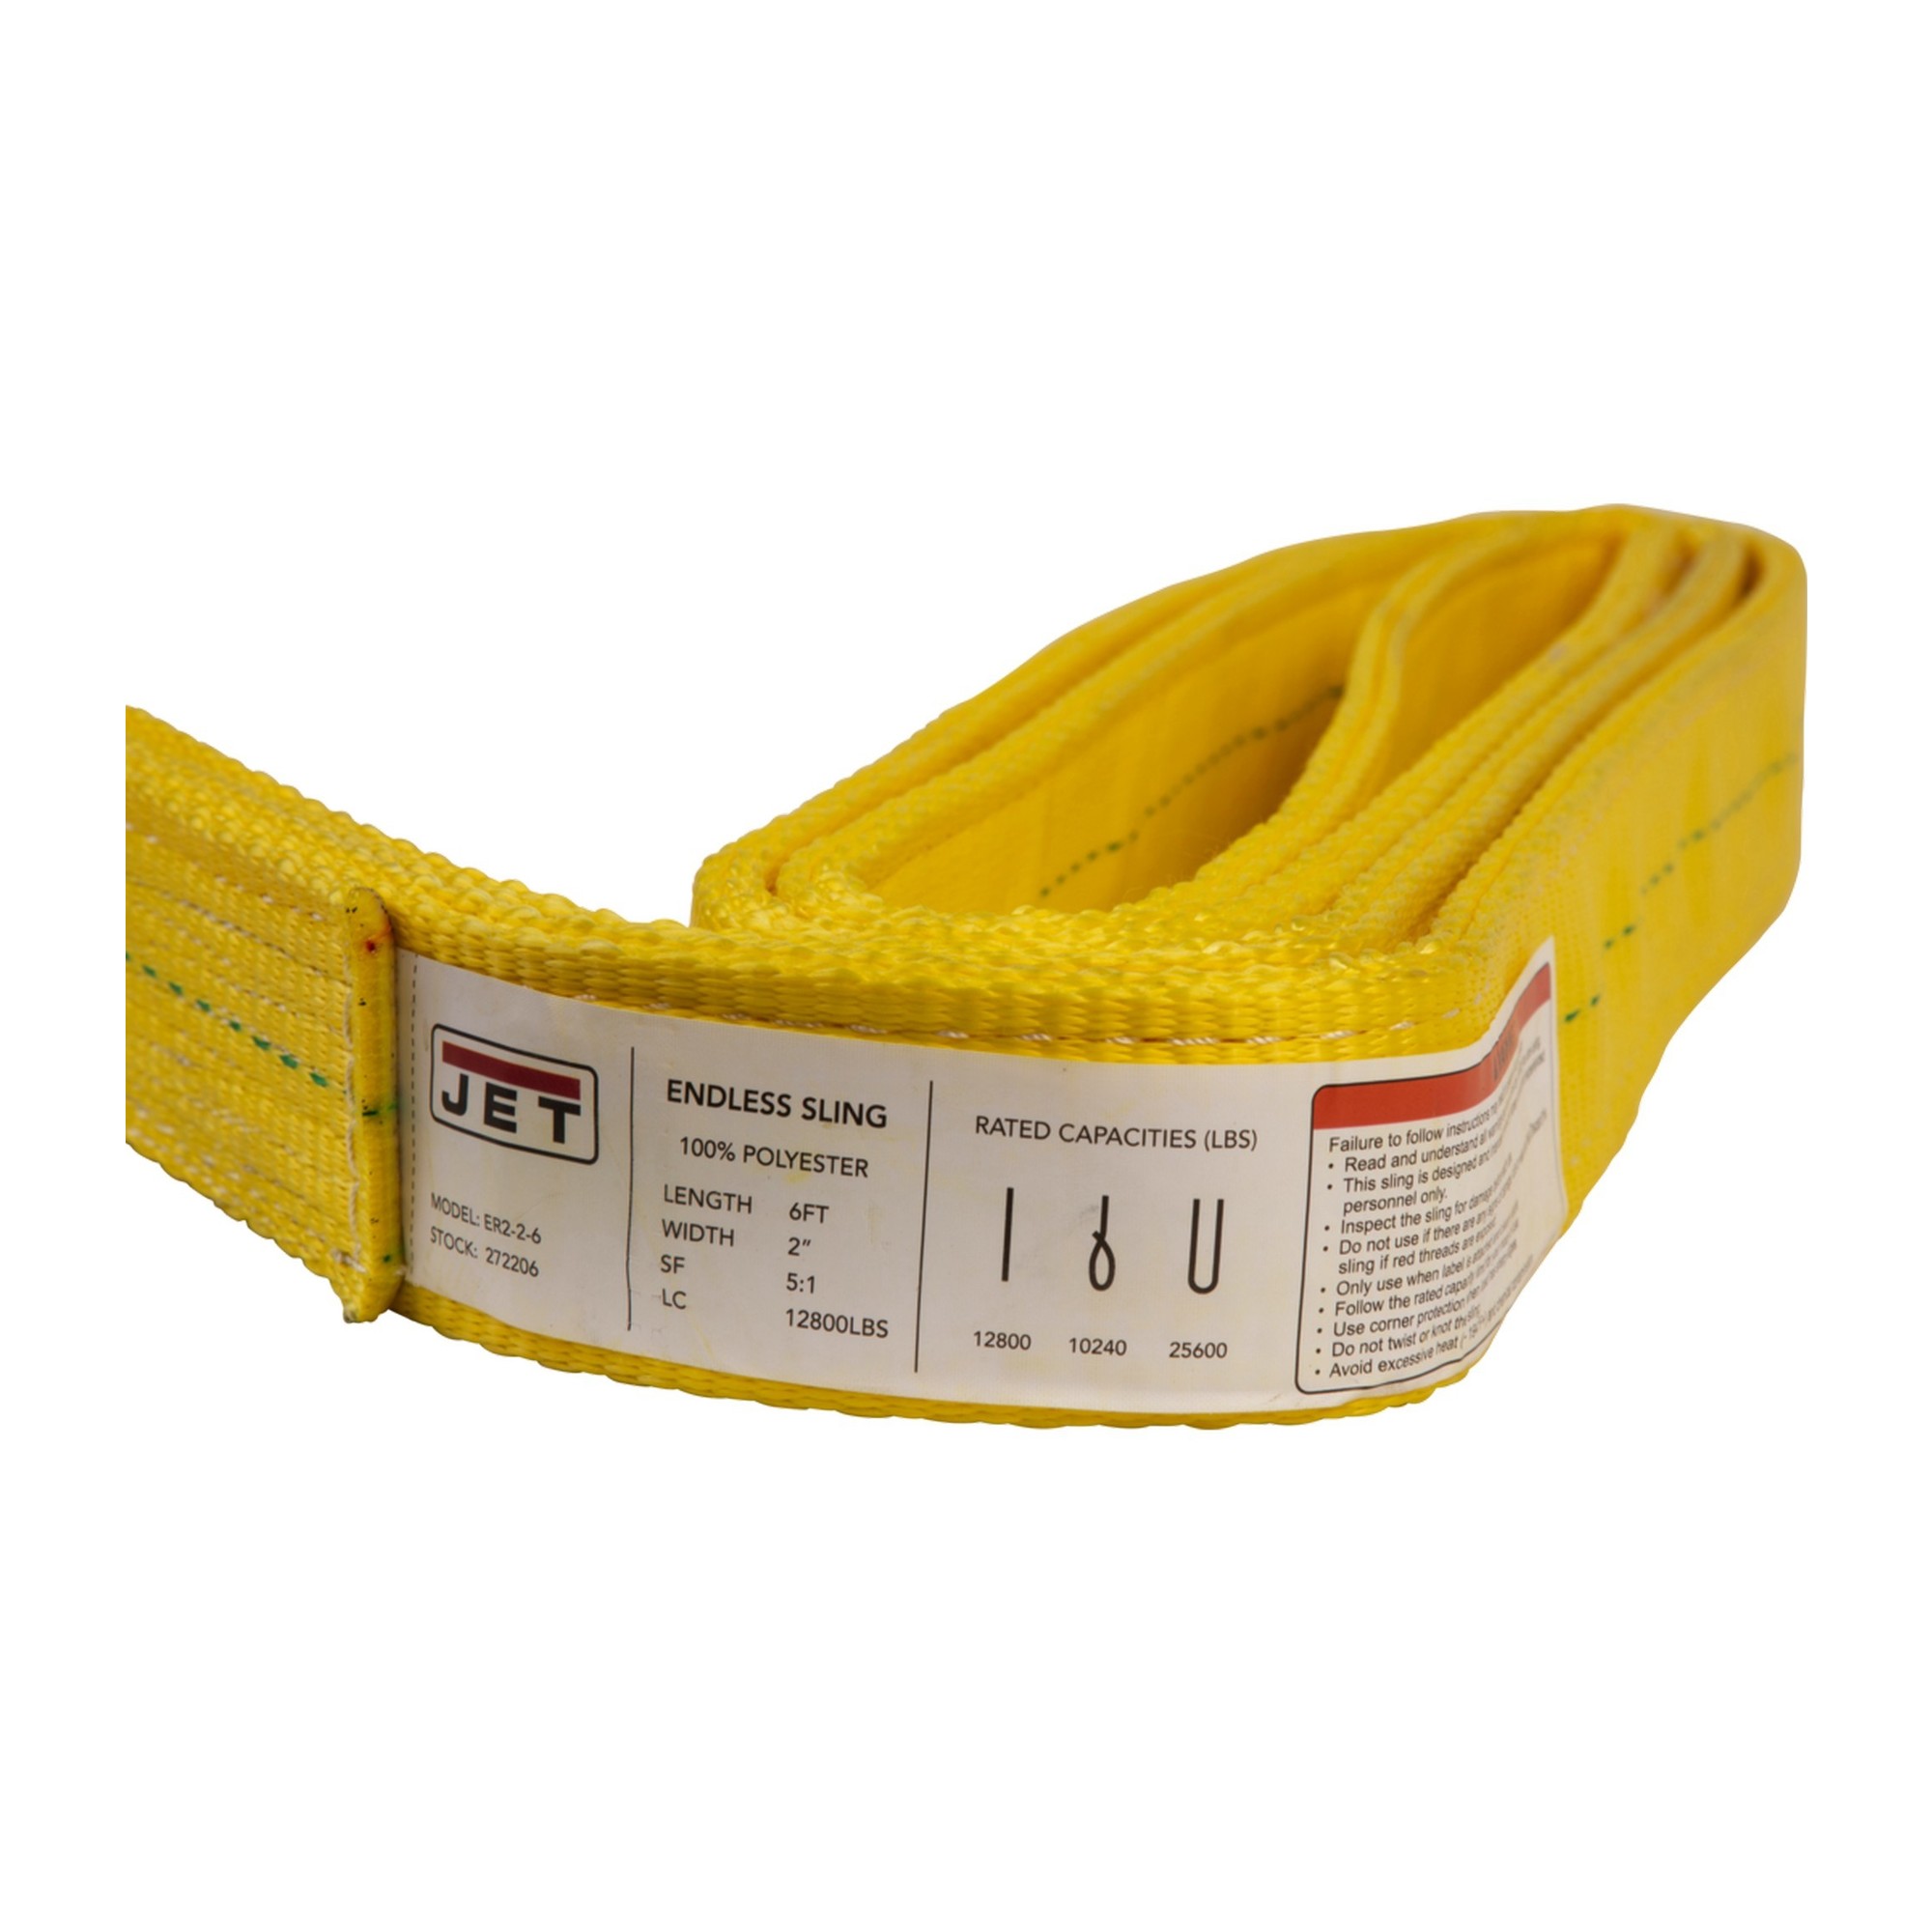 Jet, 272,210, Endless 2-Ply Polyester 2Inch x 10ft. Sling, Working Load 12800 lb, Straps (qty.) 1, Breaking Strength 12800 lb, Model 272210